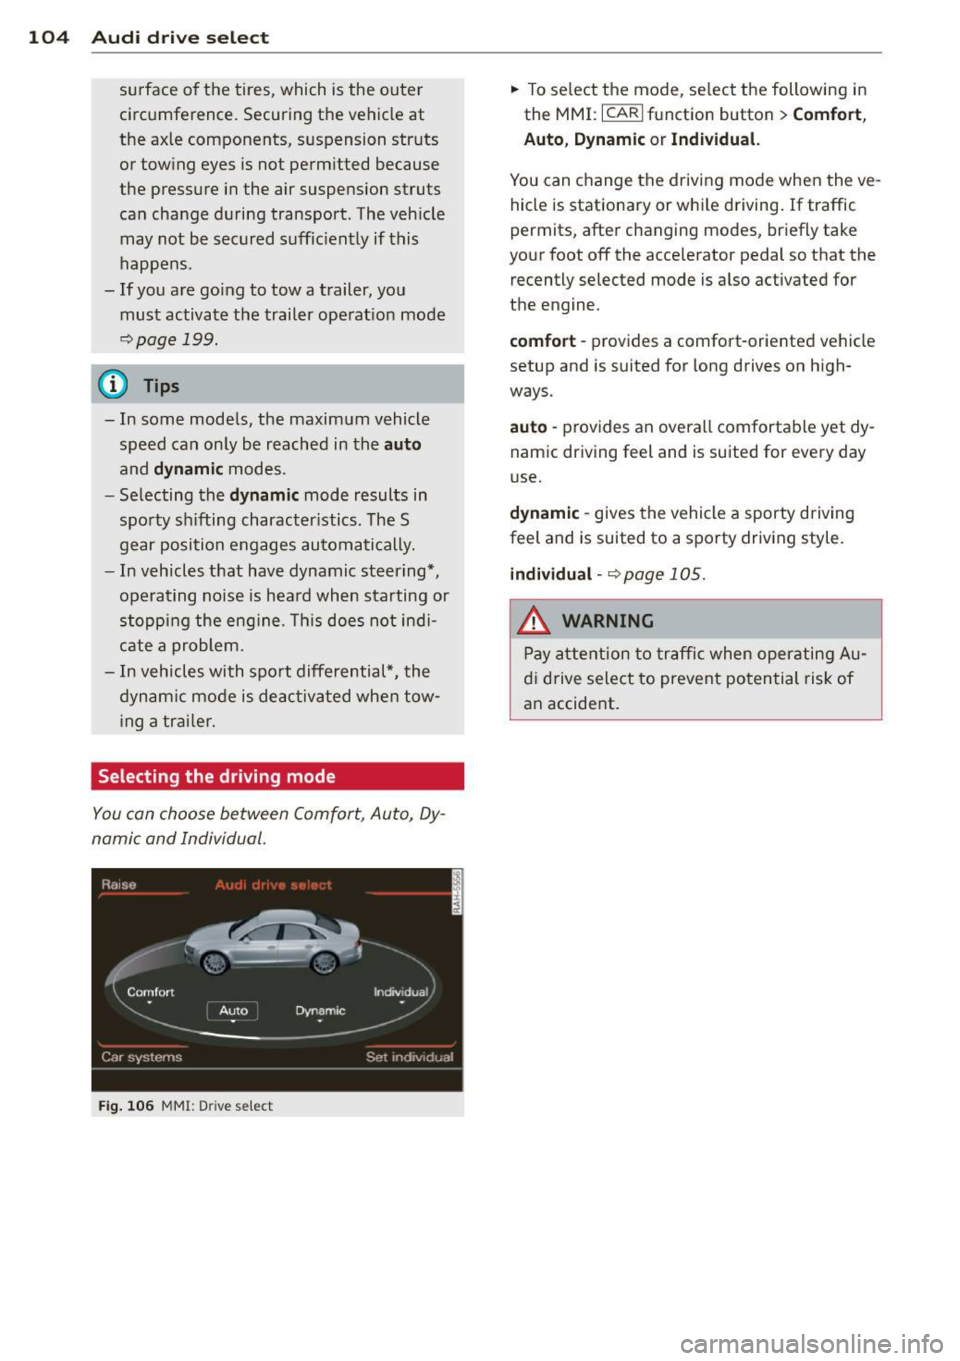 AUDI A8 2012  Owners Manual 104  Audi dri ve  sele ct 
surface  o f the  tires,  which  is the  outer 
circumference.  Securing  the  vehicle  at 
the  axle  components,  s uspension  struts 
or  towing  eyes  is not  perm itted